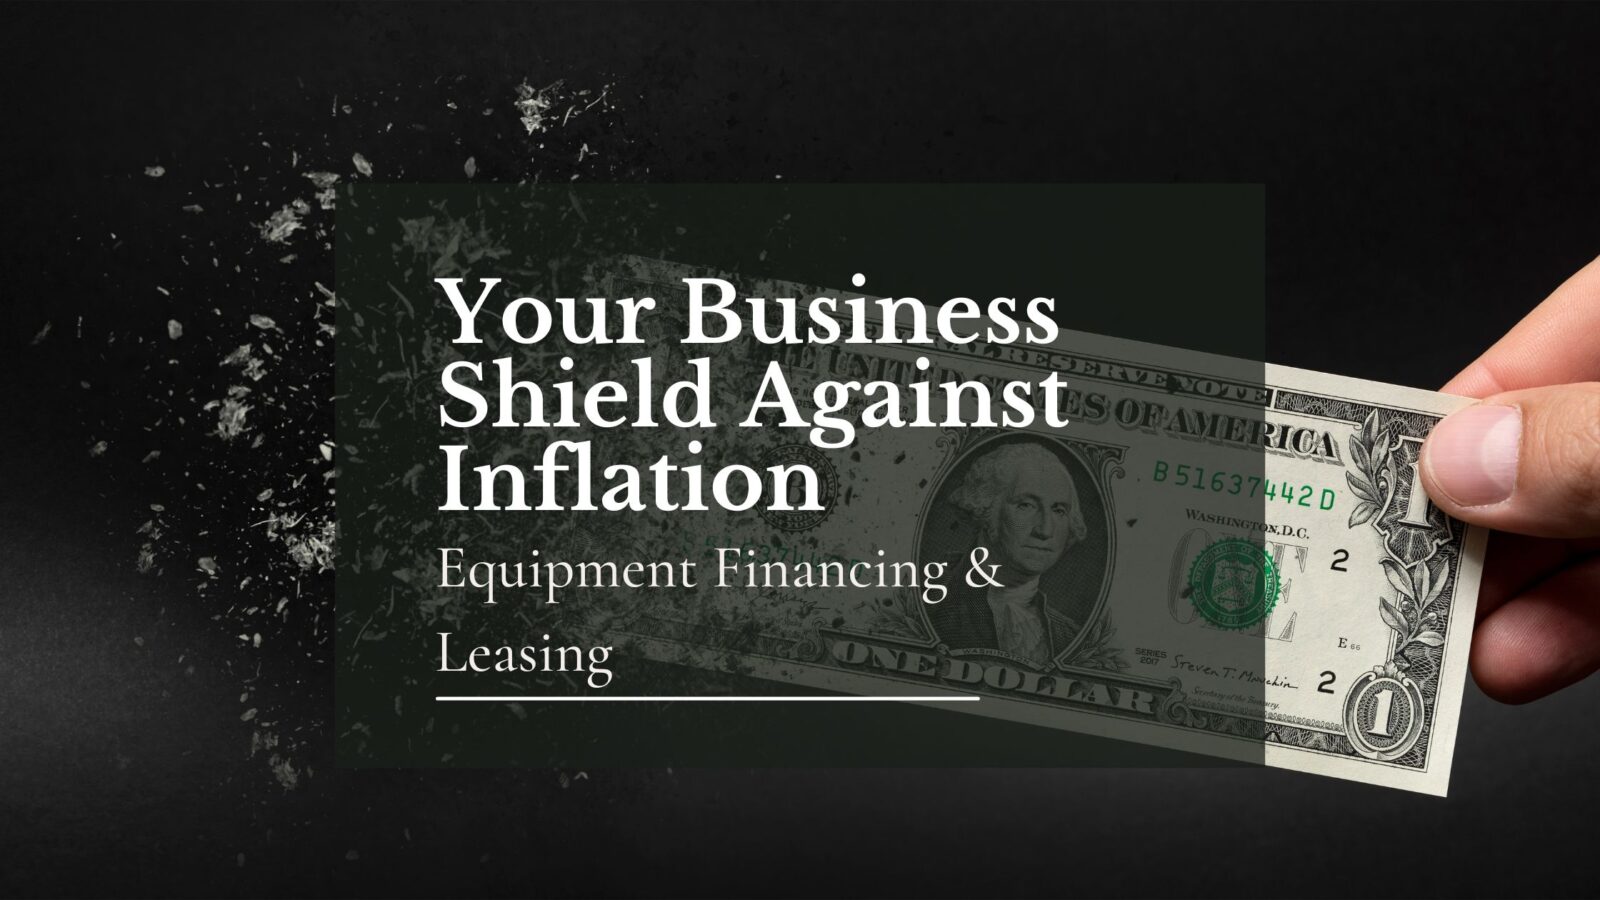 Equipment Financing and Leasing: Your Business Shield Against Inflation